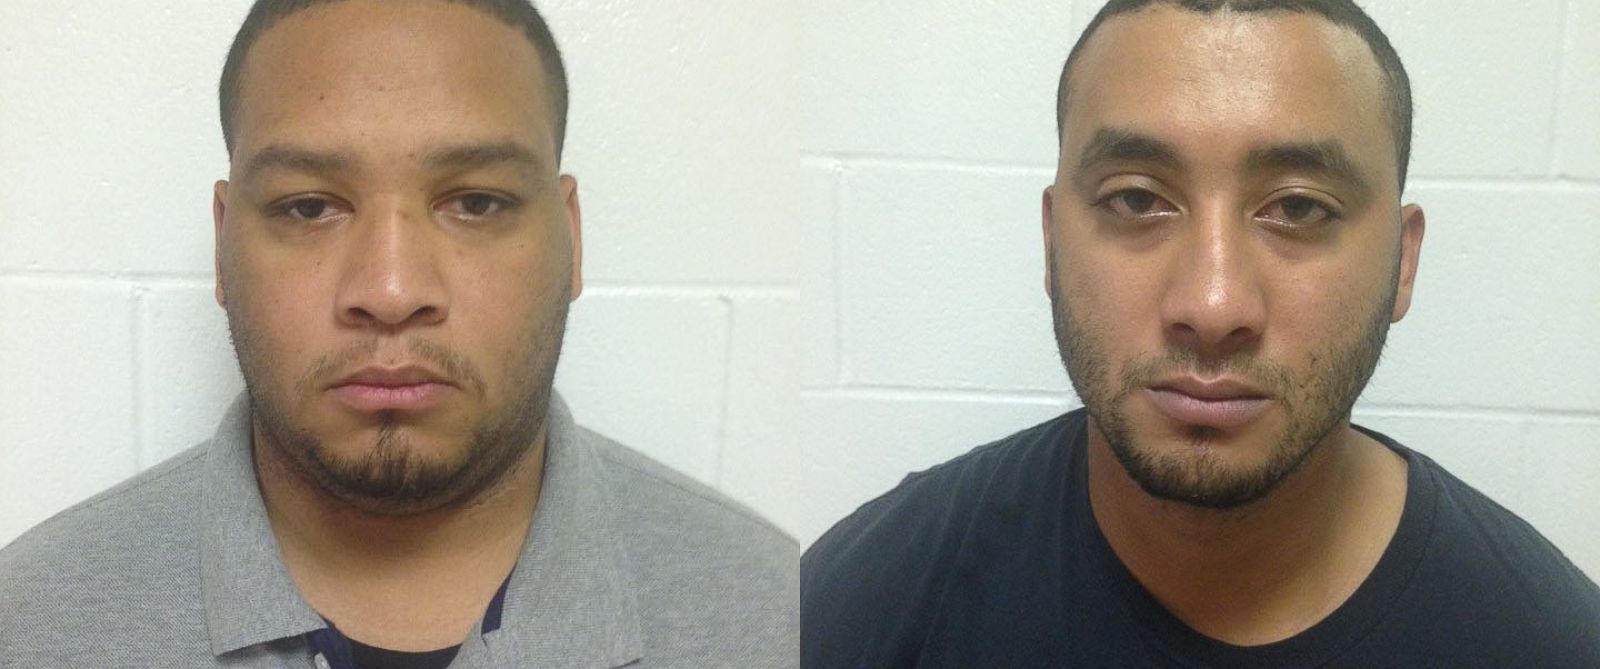 PHOTO: Louisiana State Police have released mug shots for Derrick W. Stafford (left) and Norris J. Greenhouse Jr., the police officers arrested in the death of a 6-year-old boy in Louisiana. 